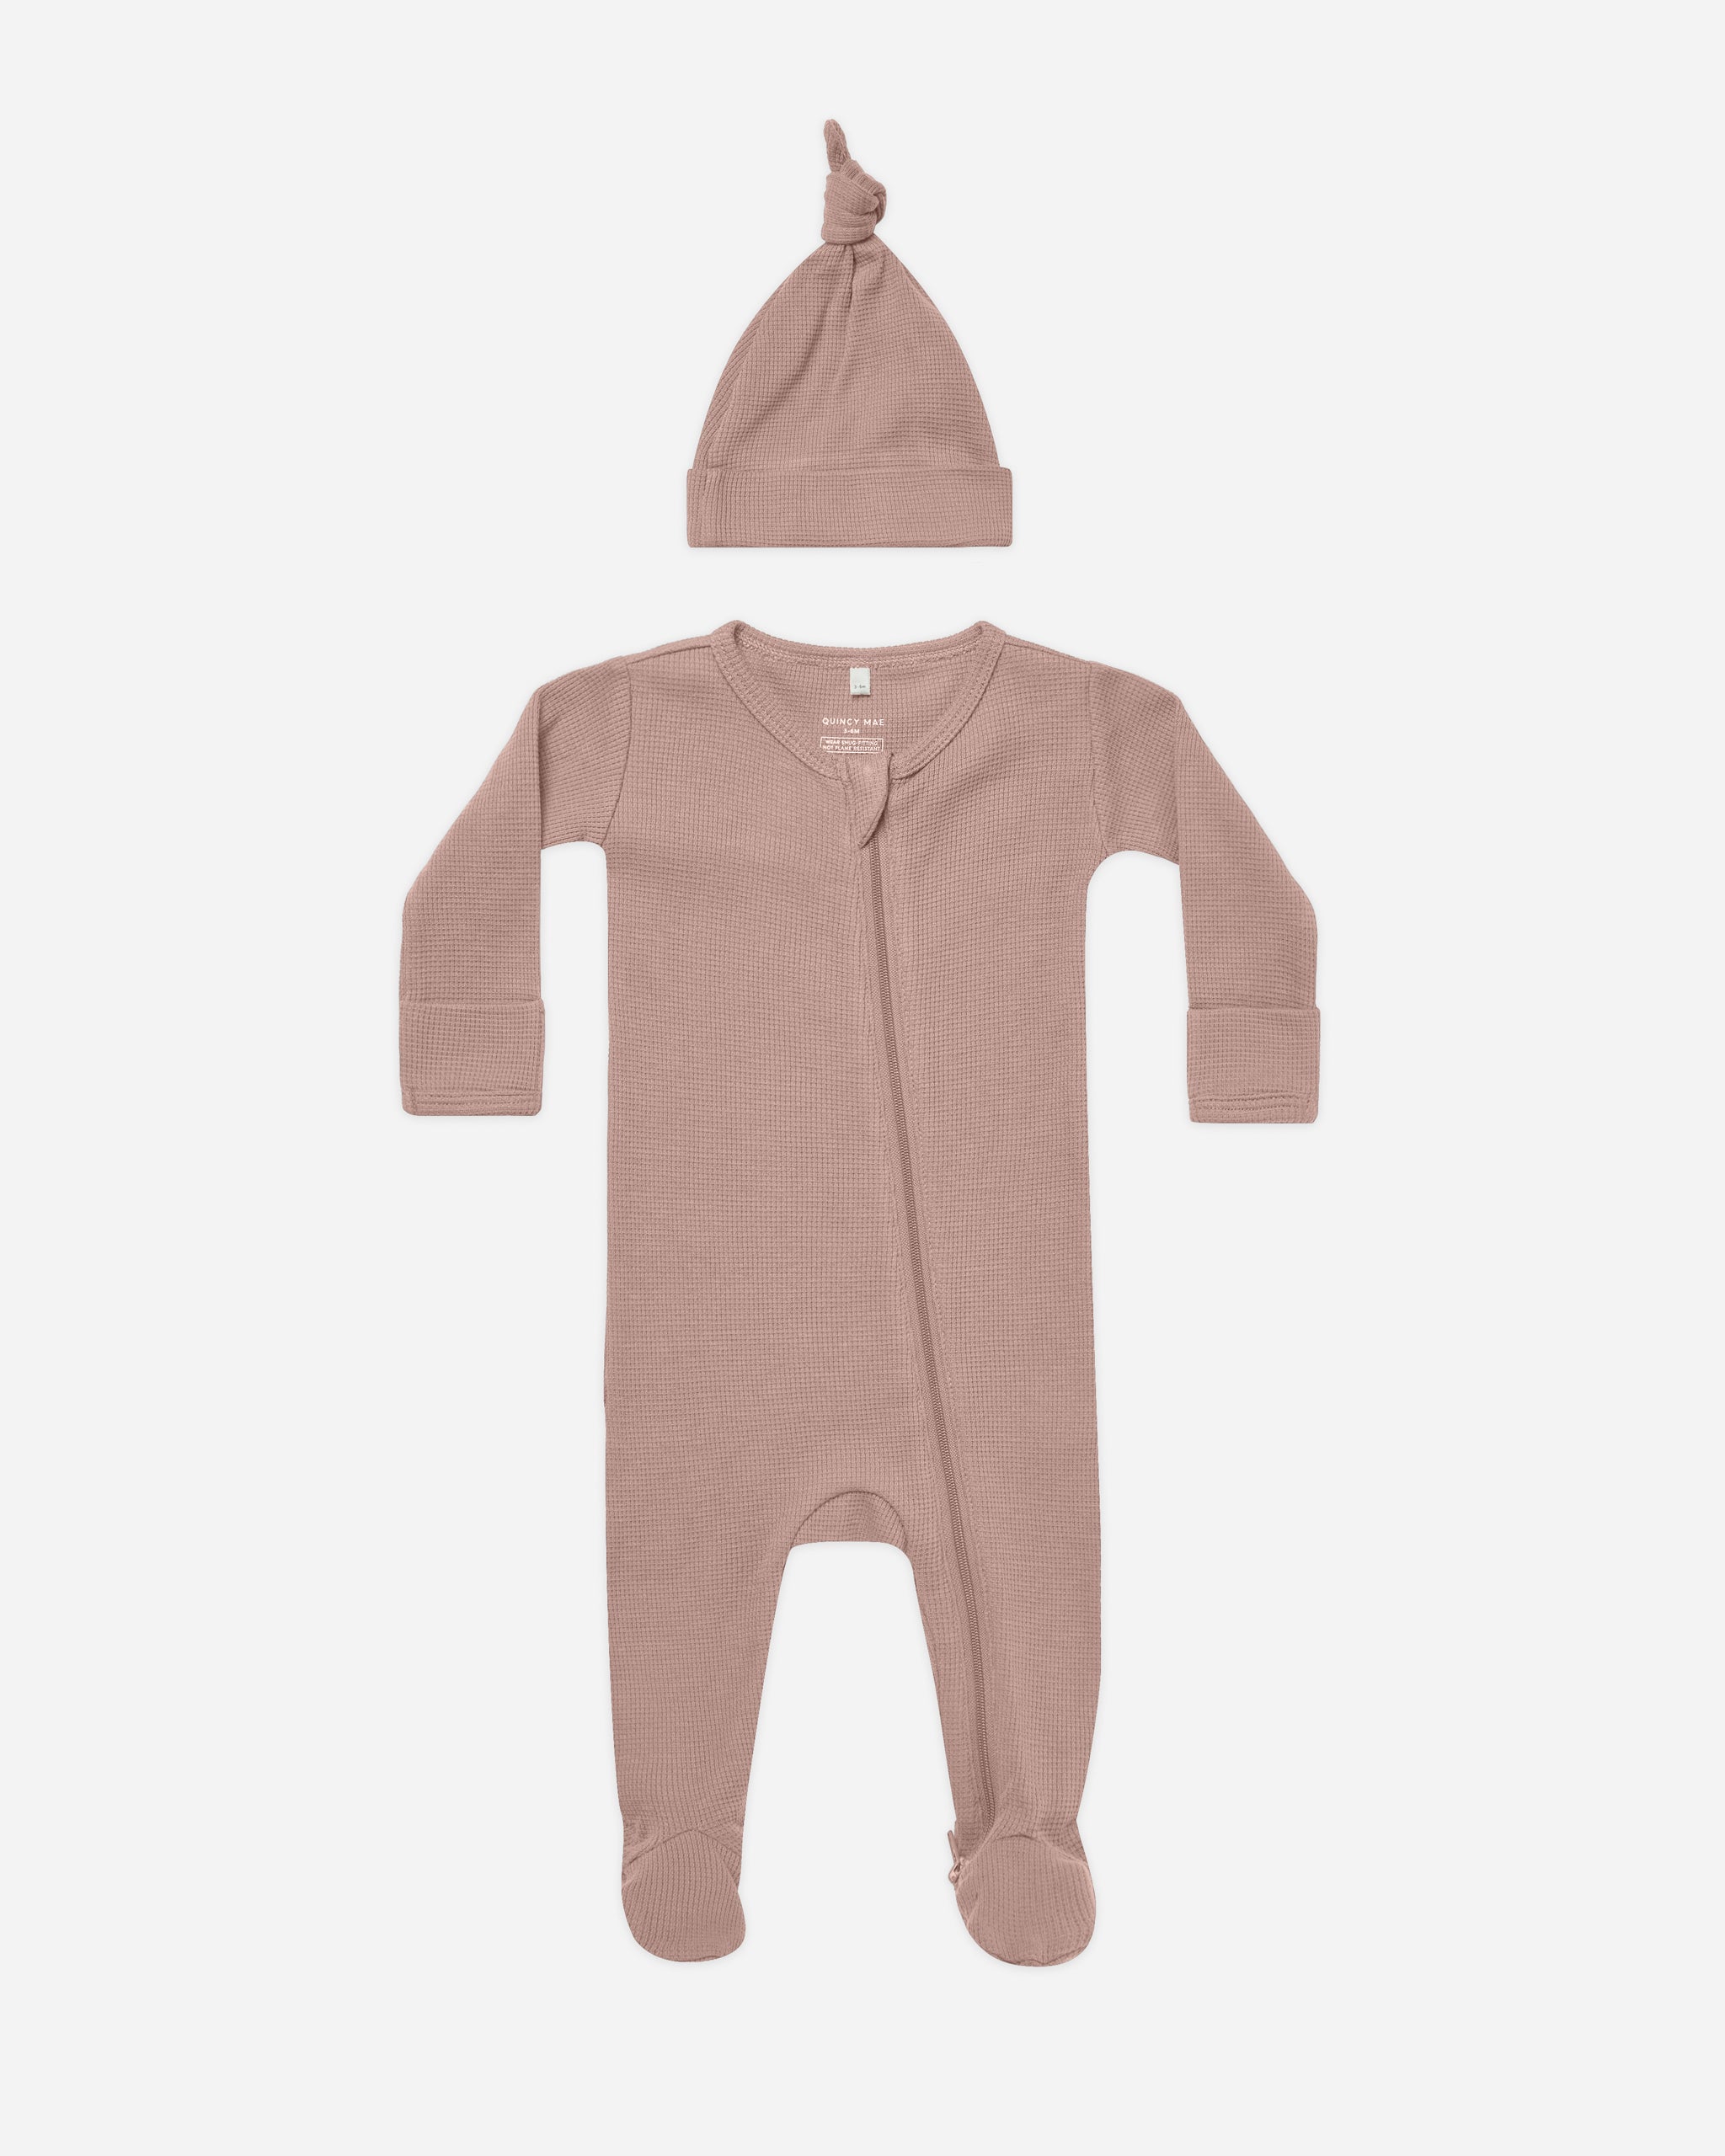 Waffle Sleep Set || Mauve - Rylee + Cru | Kids Clothes | Trendy Baby Clothes | Modern Infant Outfits |